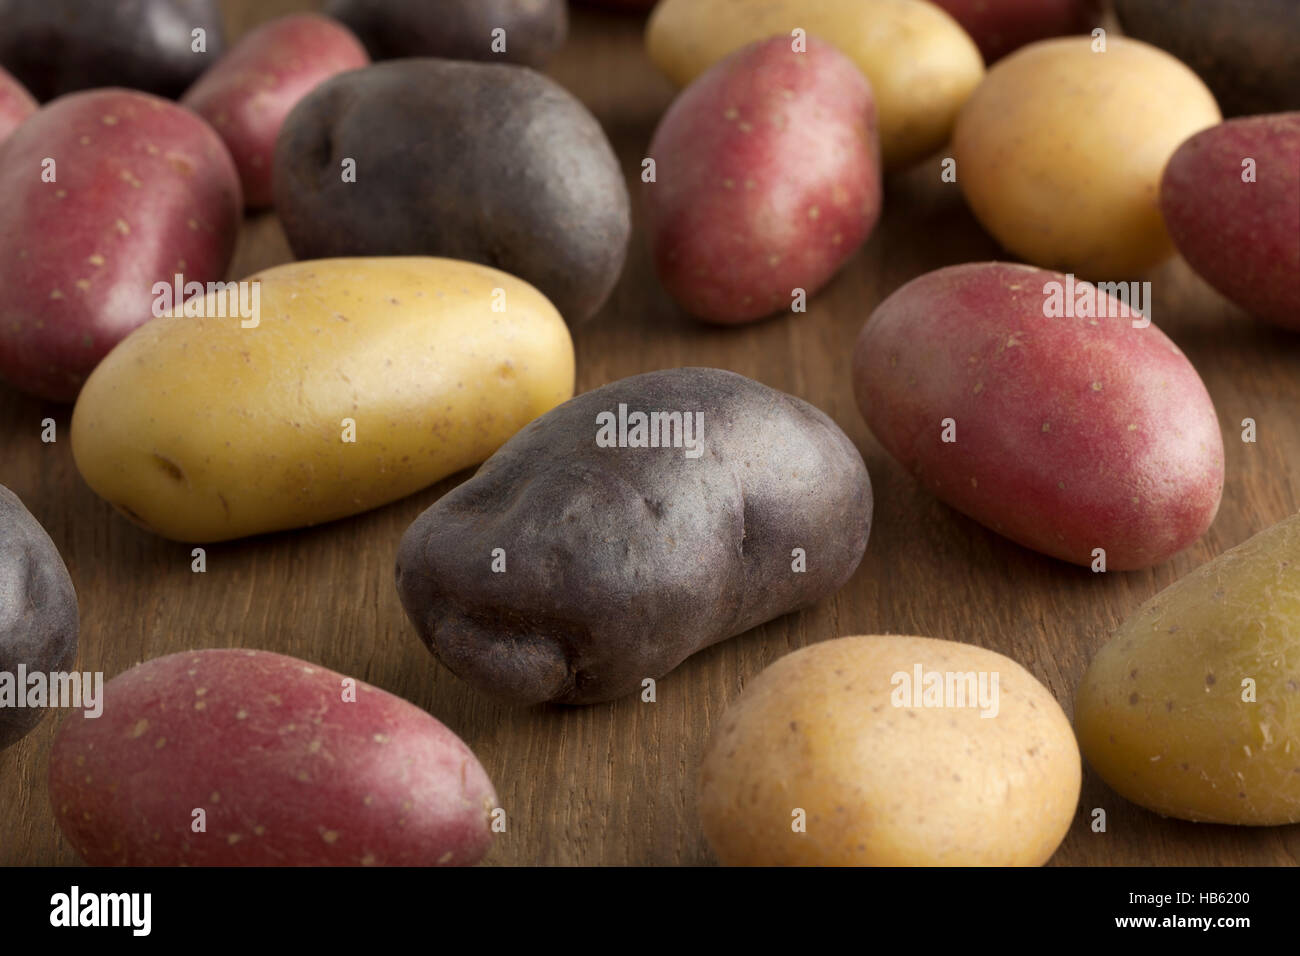 Variety of fresh different potatoes Stock Photo